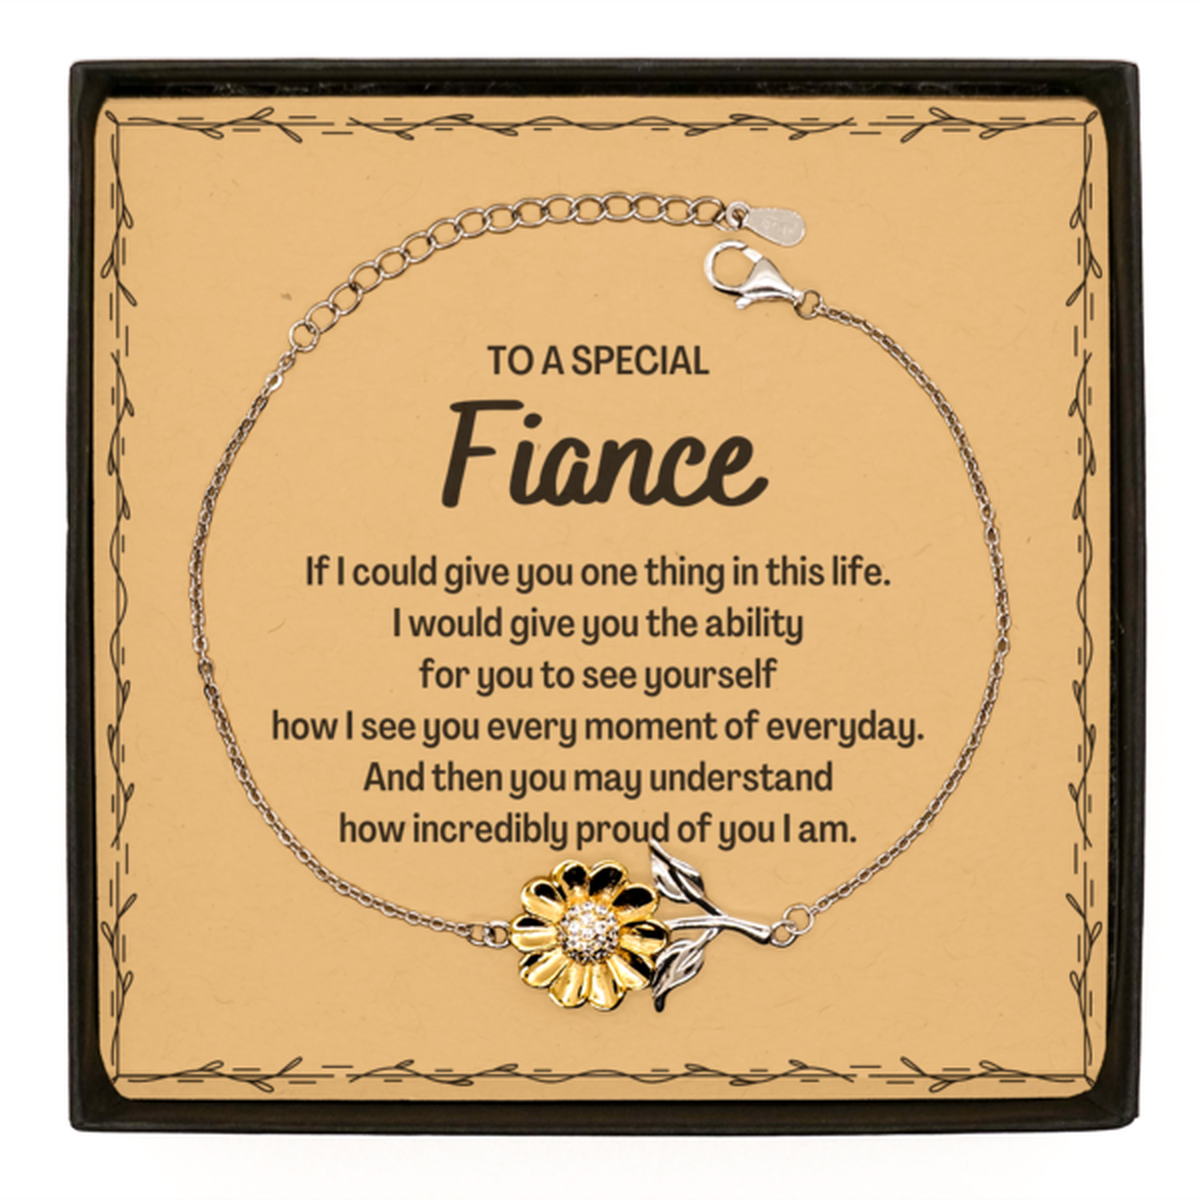 To My Fiance Sunflower Bracelet, Gifts For Fiance Message Card, Inspirational Gifts for Christmas Birthday, Epic Gifts for Fiance To A Special Fiance how incredibly proud of you I am